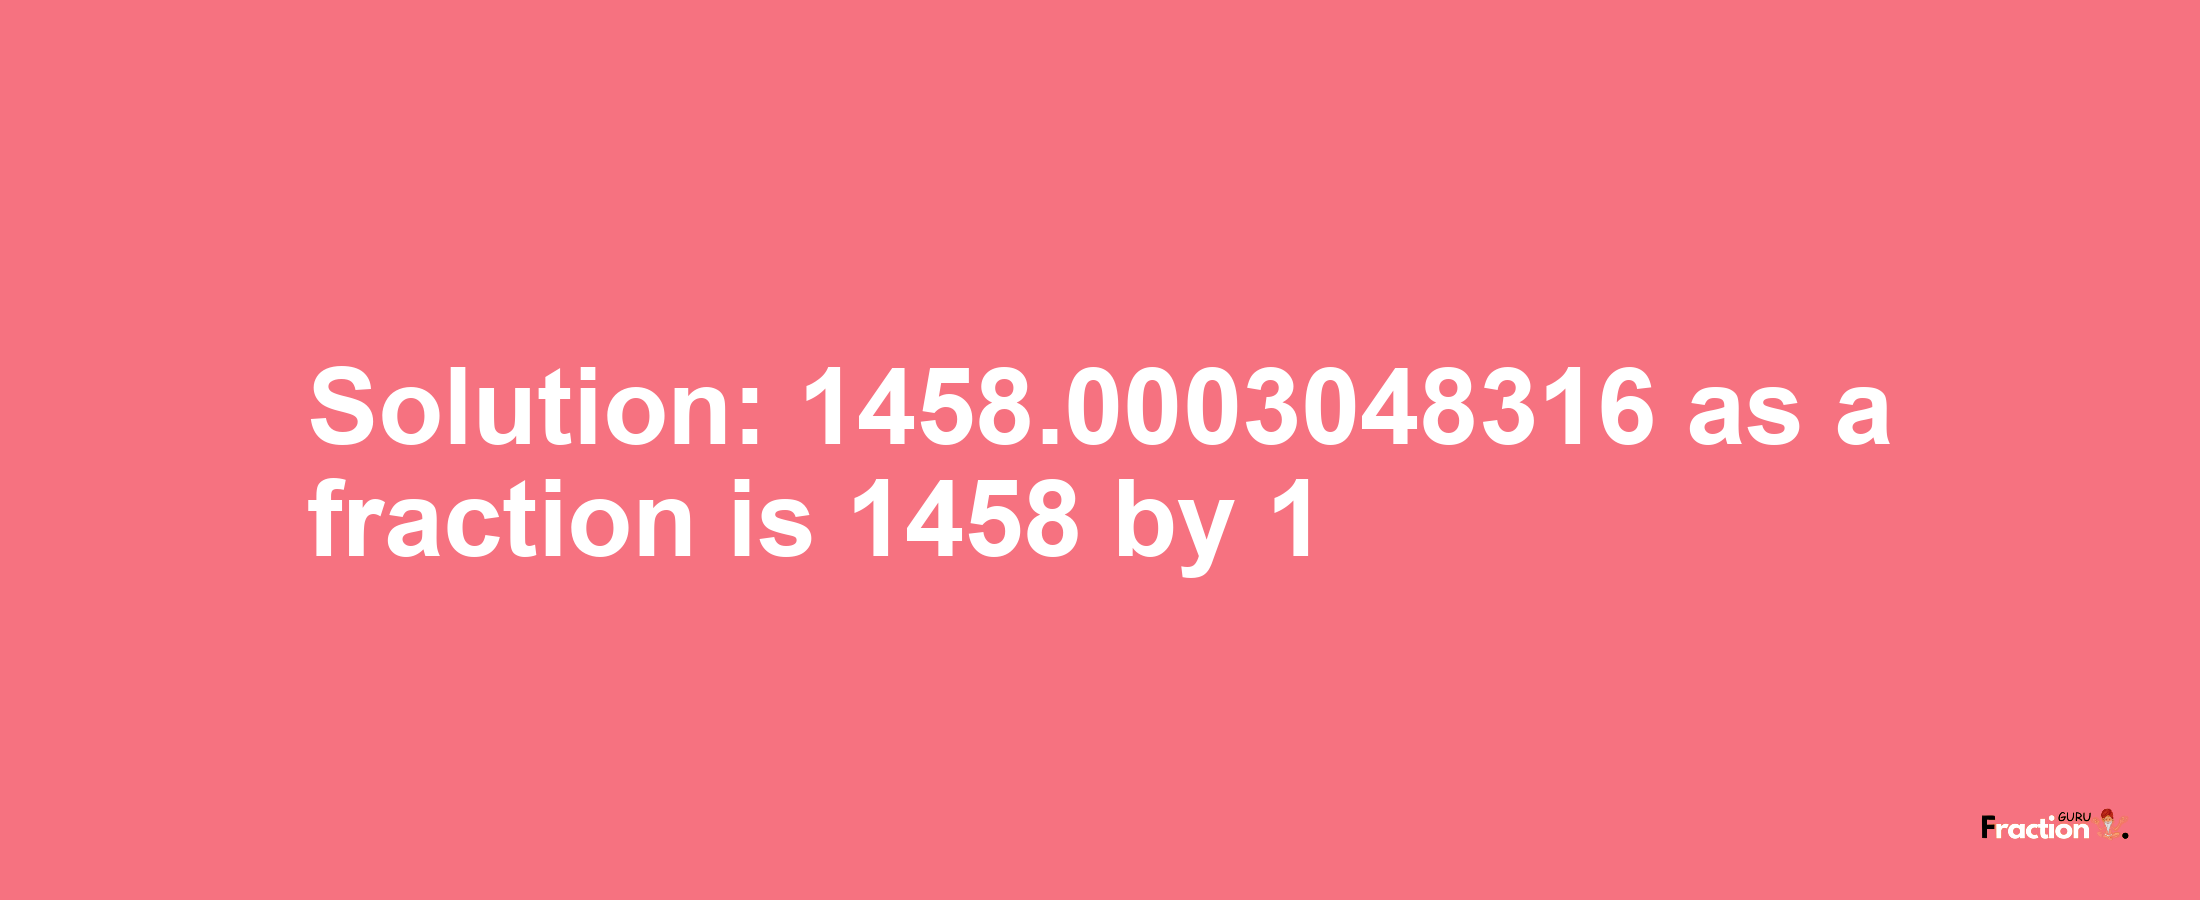 Solution:1458.0003048316 as a fraction is 1458/1